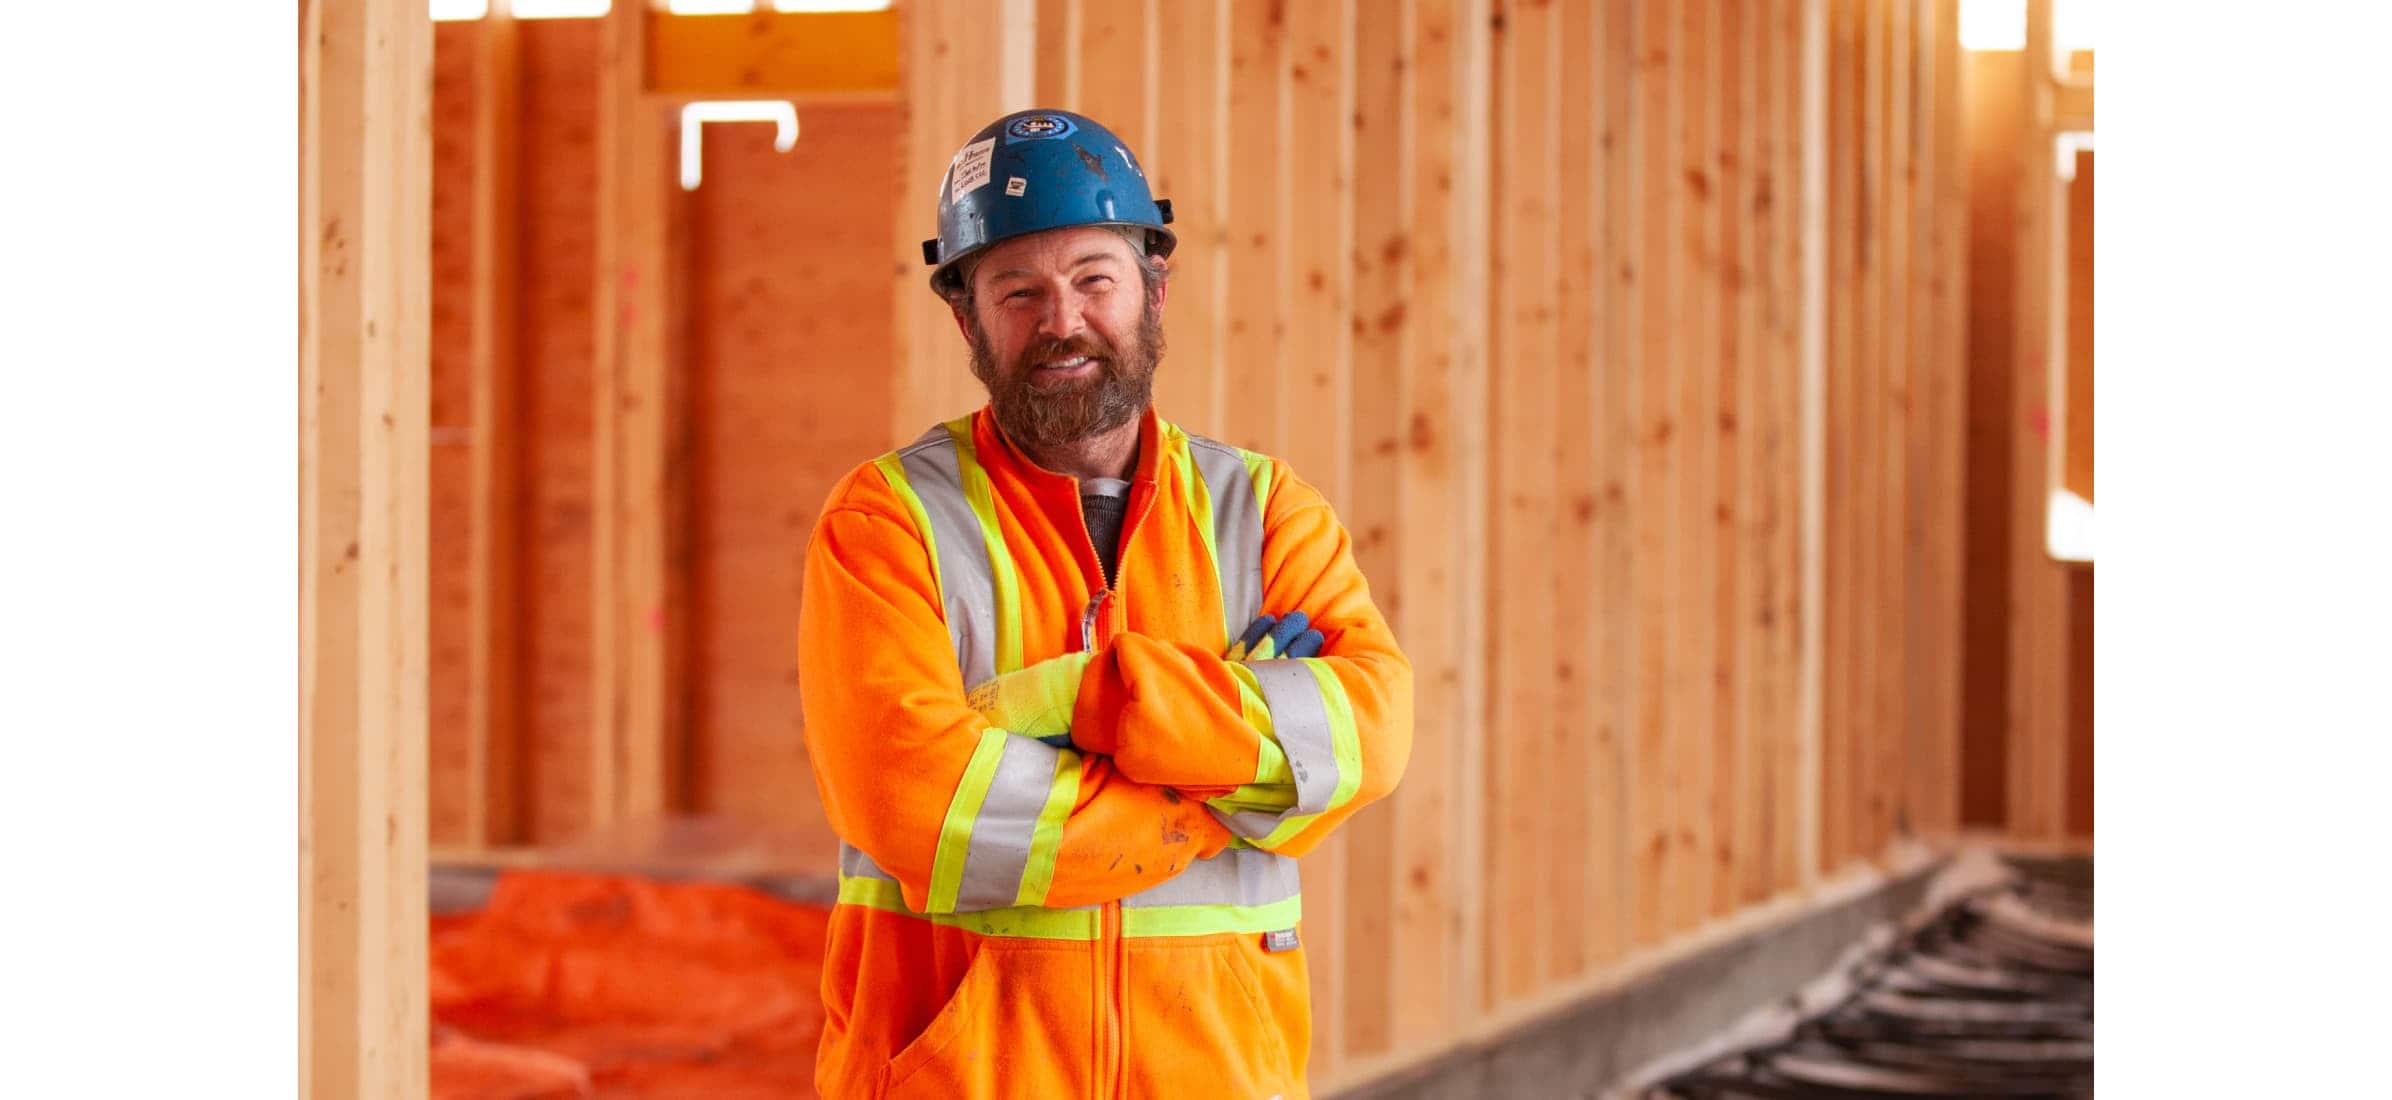 Brad standing with his arms folded wearing high visibility gear and a helmet on a construction site.